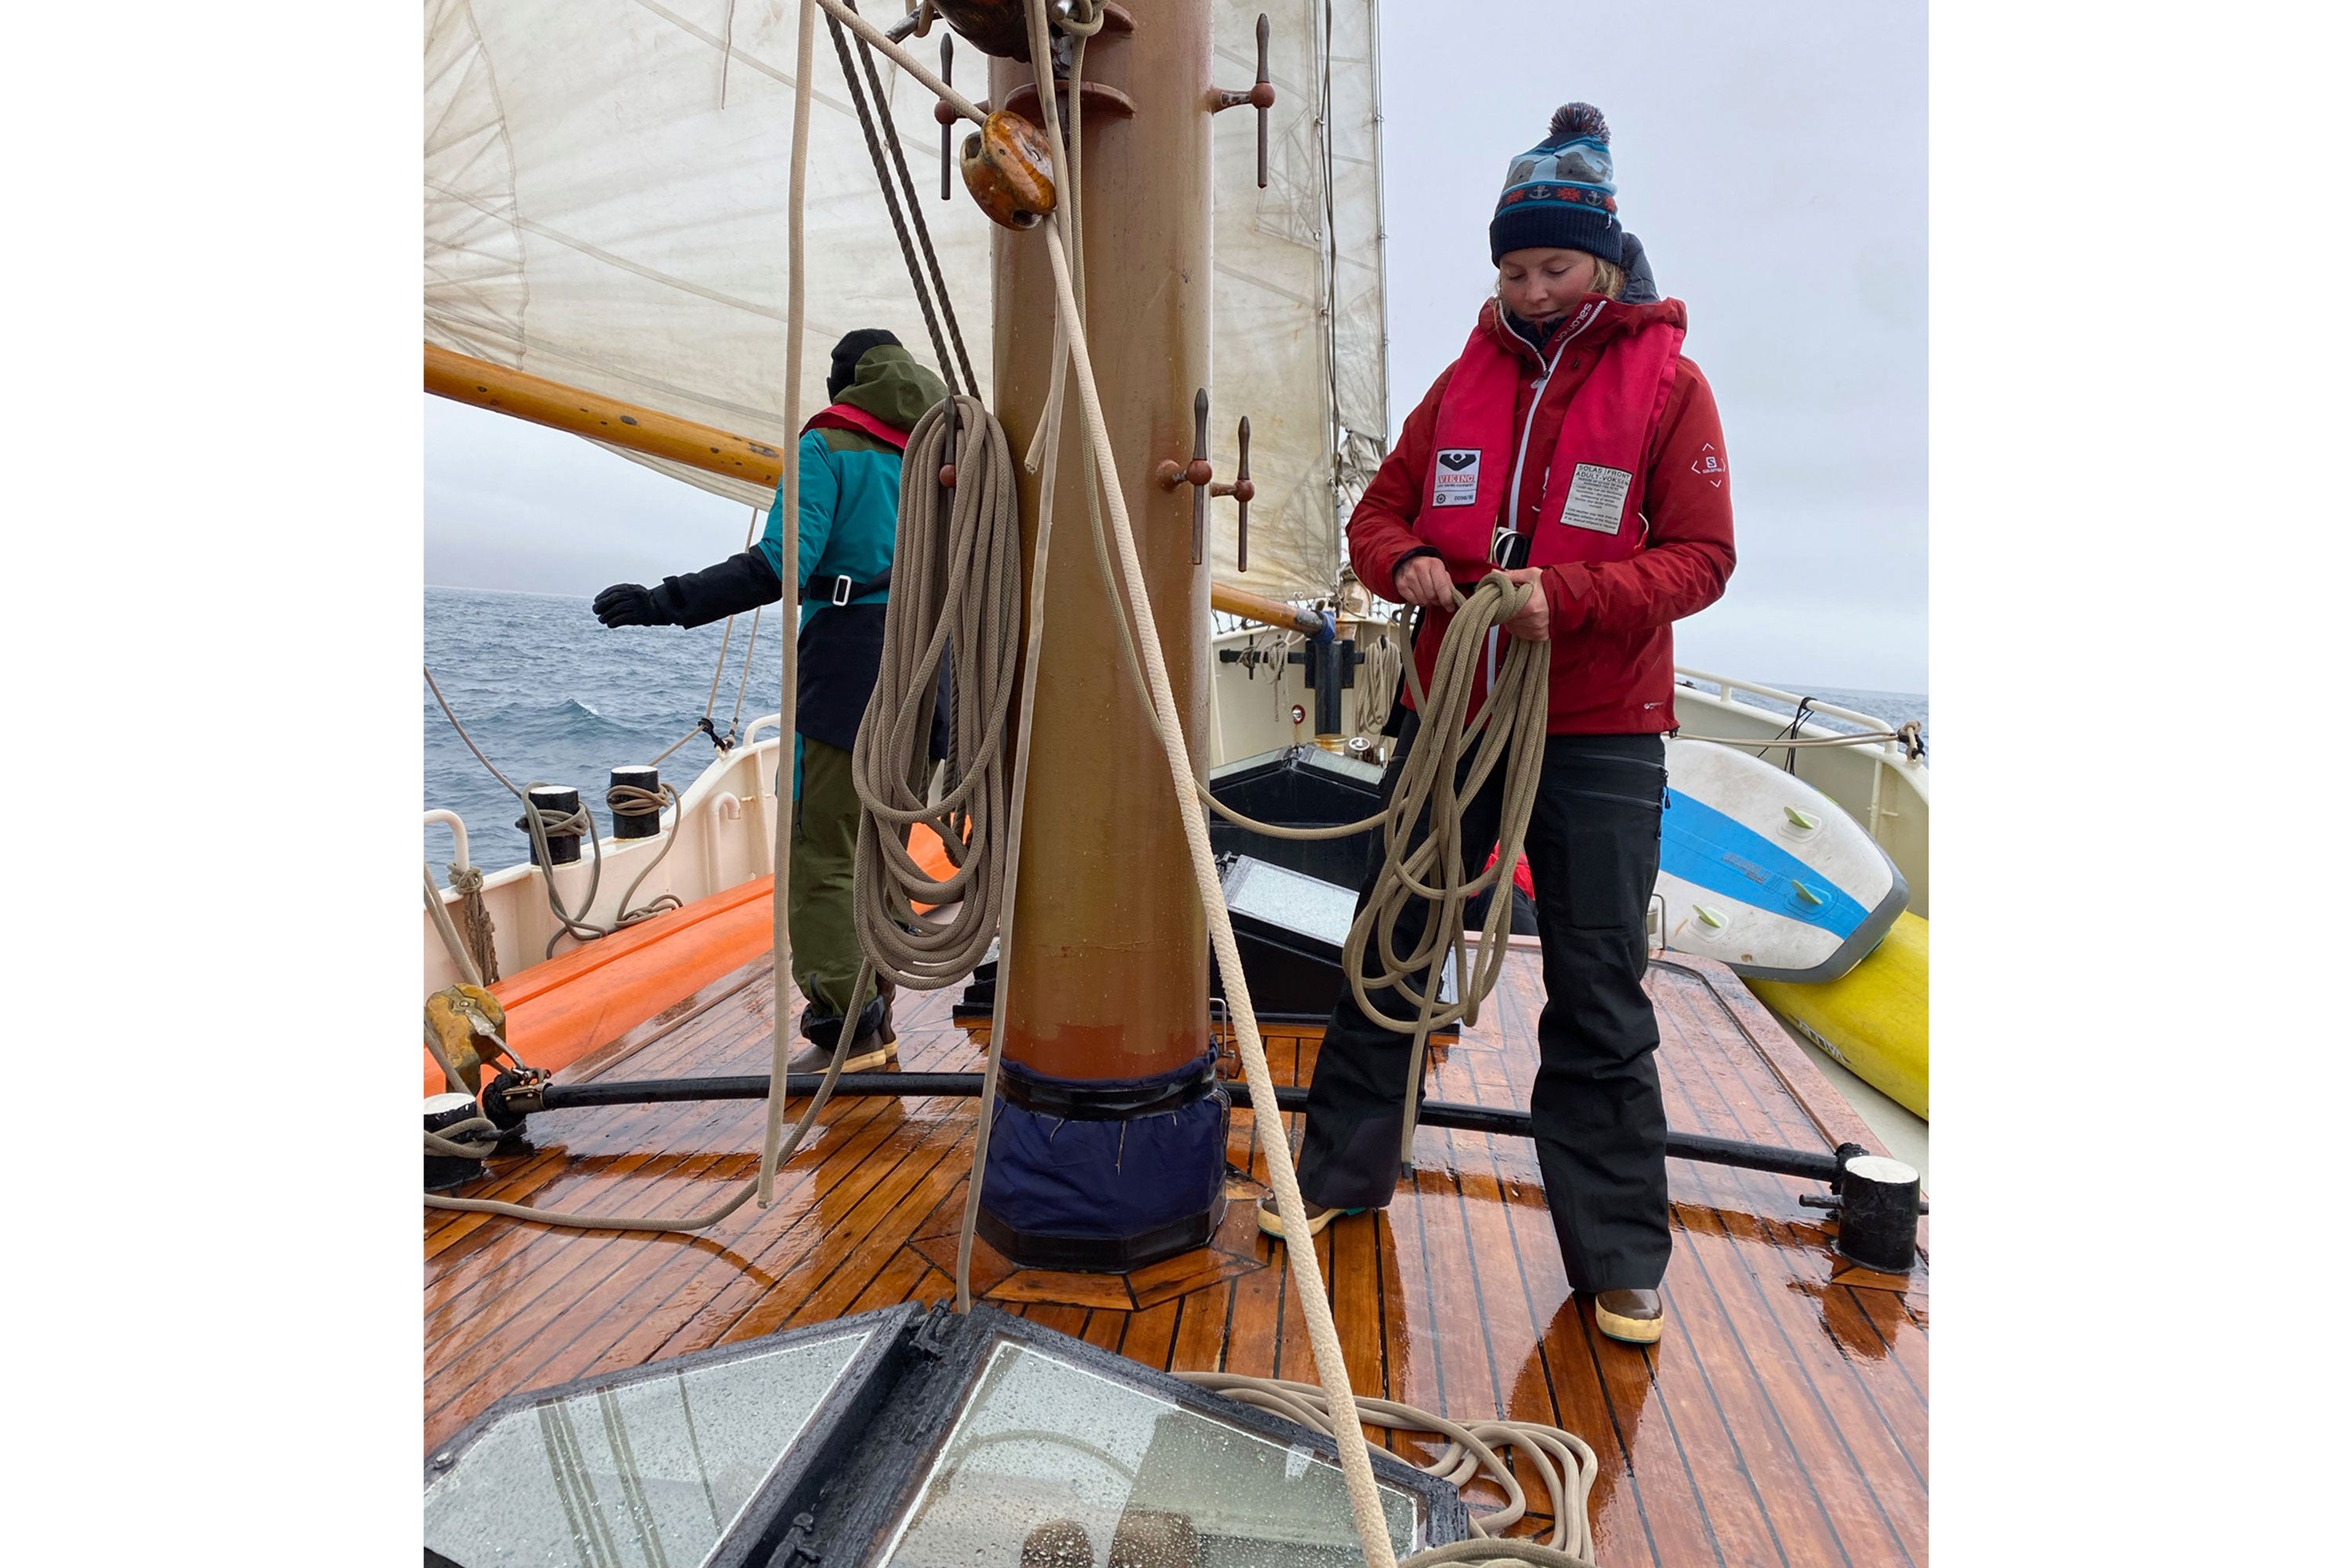 McKenna Peterson and another family member sorting through rope for the sails on their boat. McKenna is wearing a bobble hat, red jacket, life jacket, black trousers and a pair of Xtratuf Legacy Boots